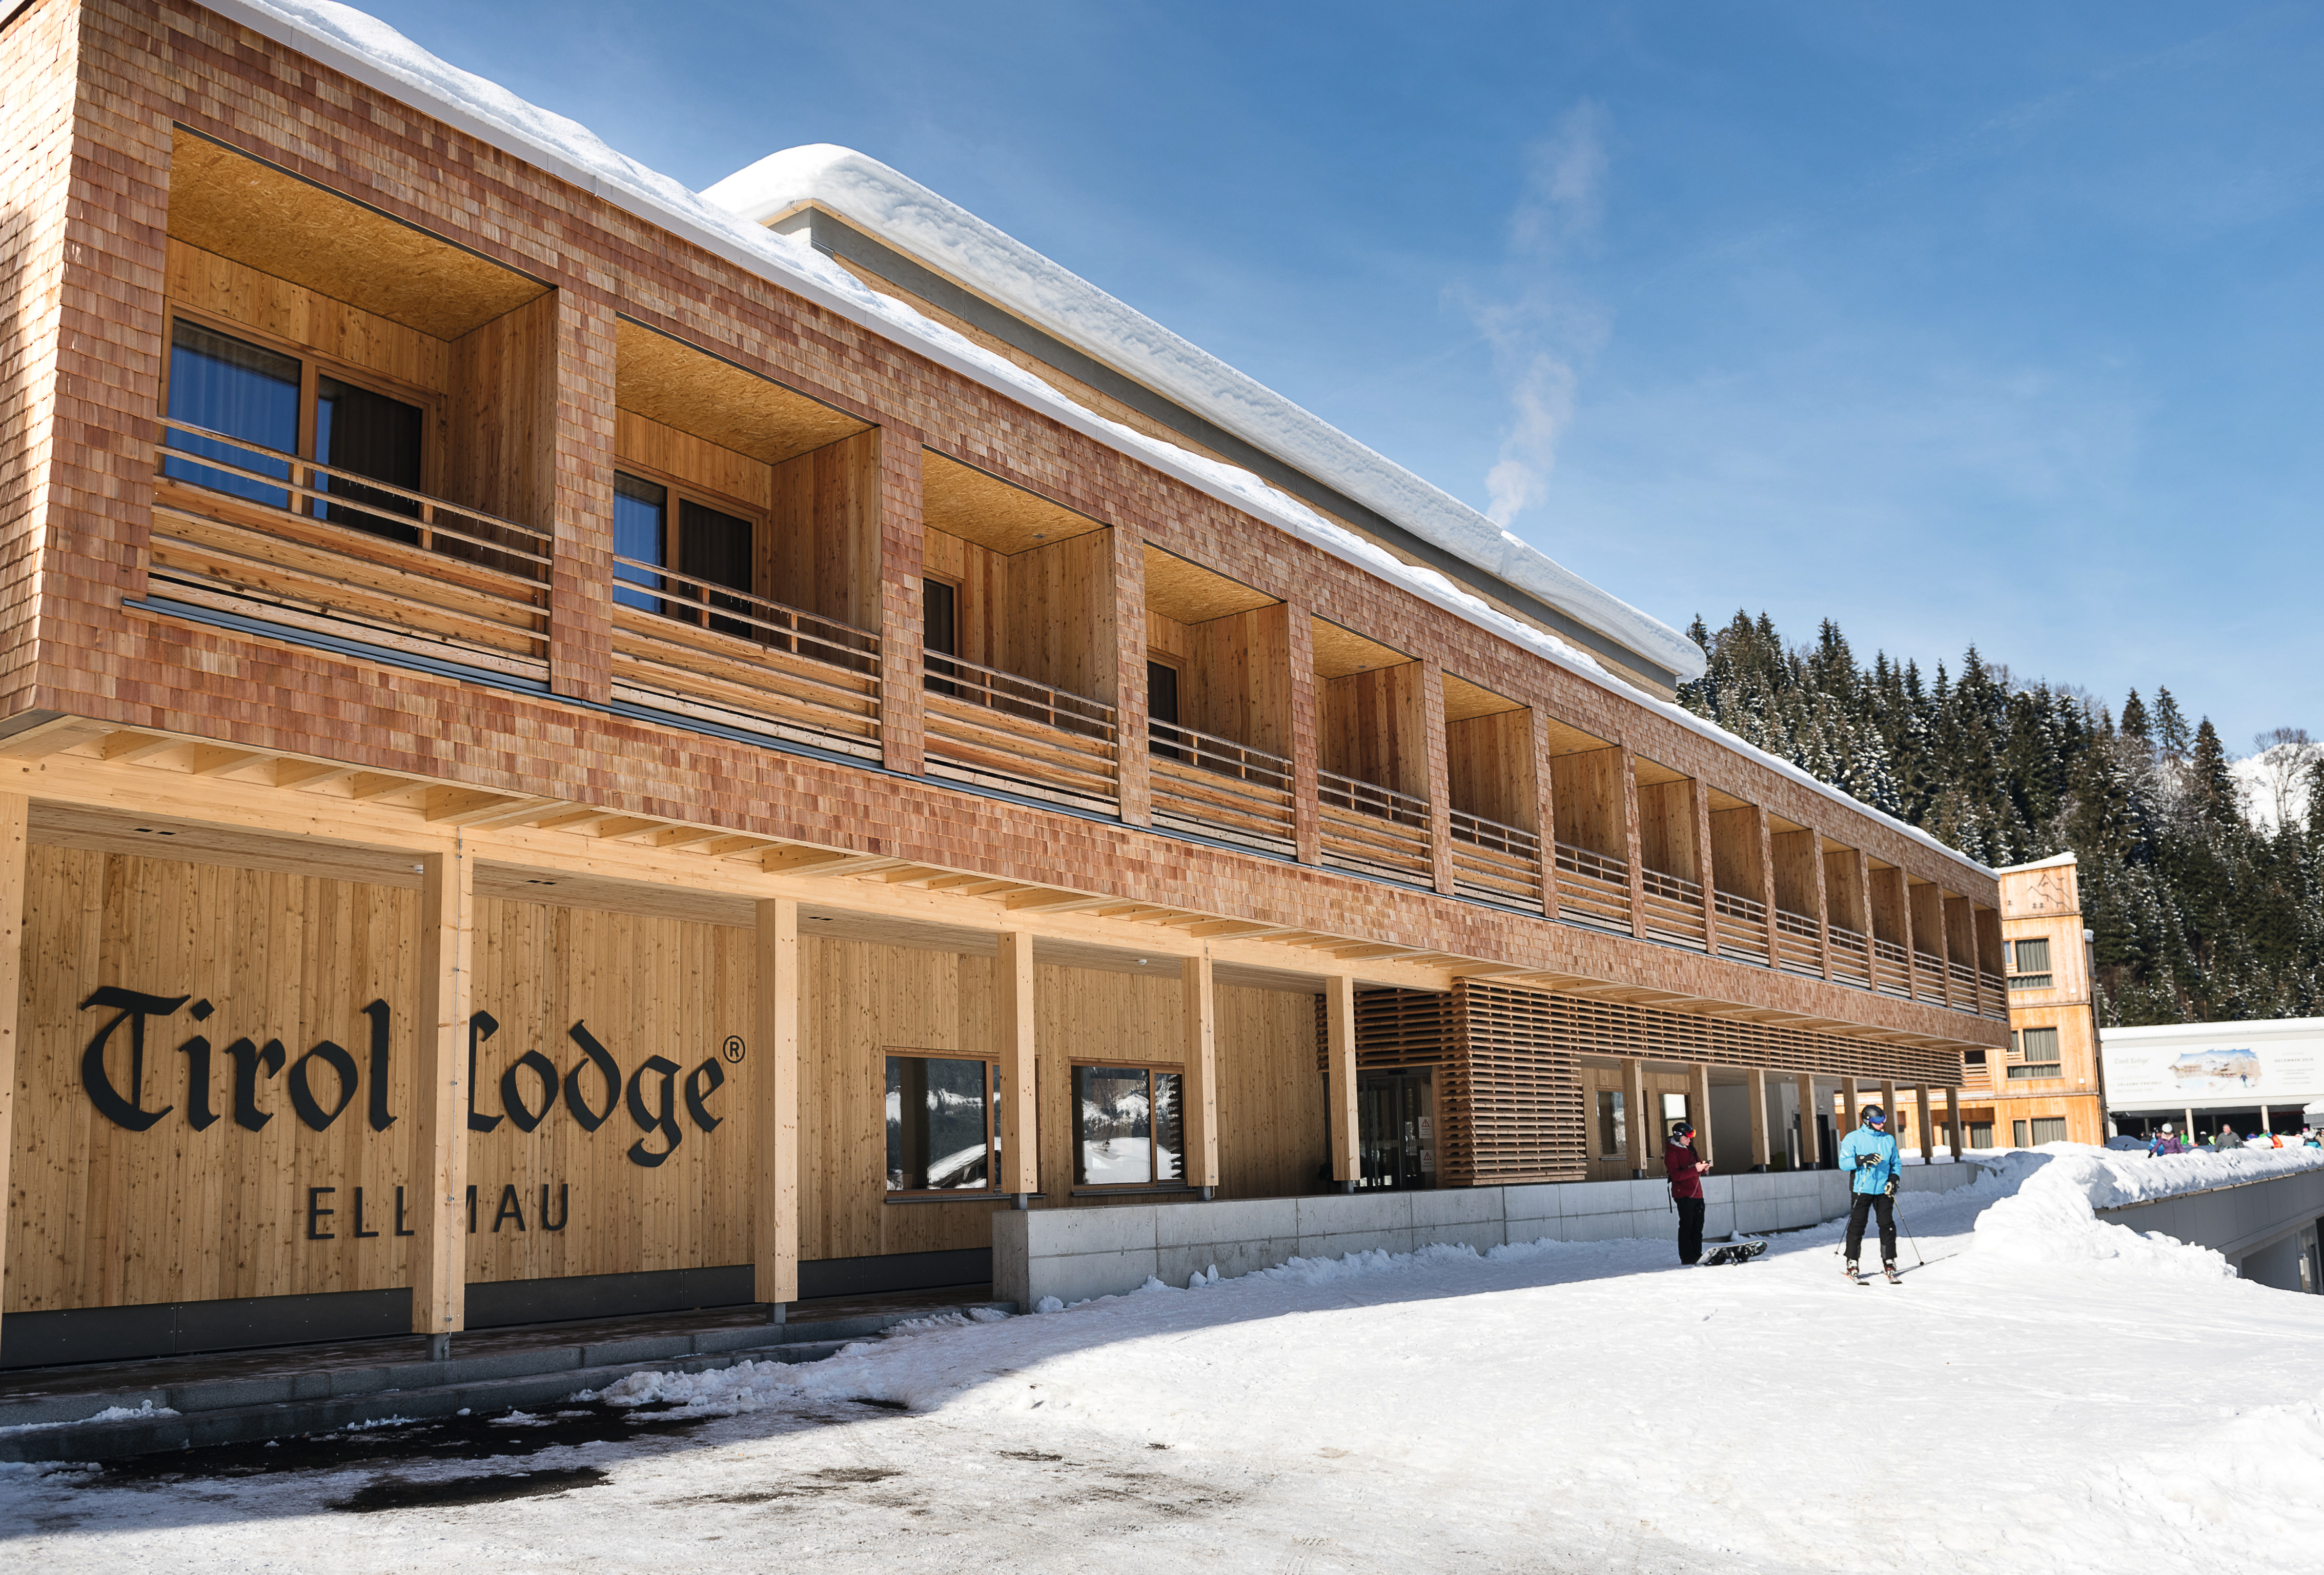 The hotel Tirol Lodge during a royal winter. © Klaus Bauer Photomotion